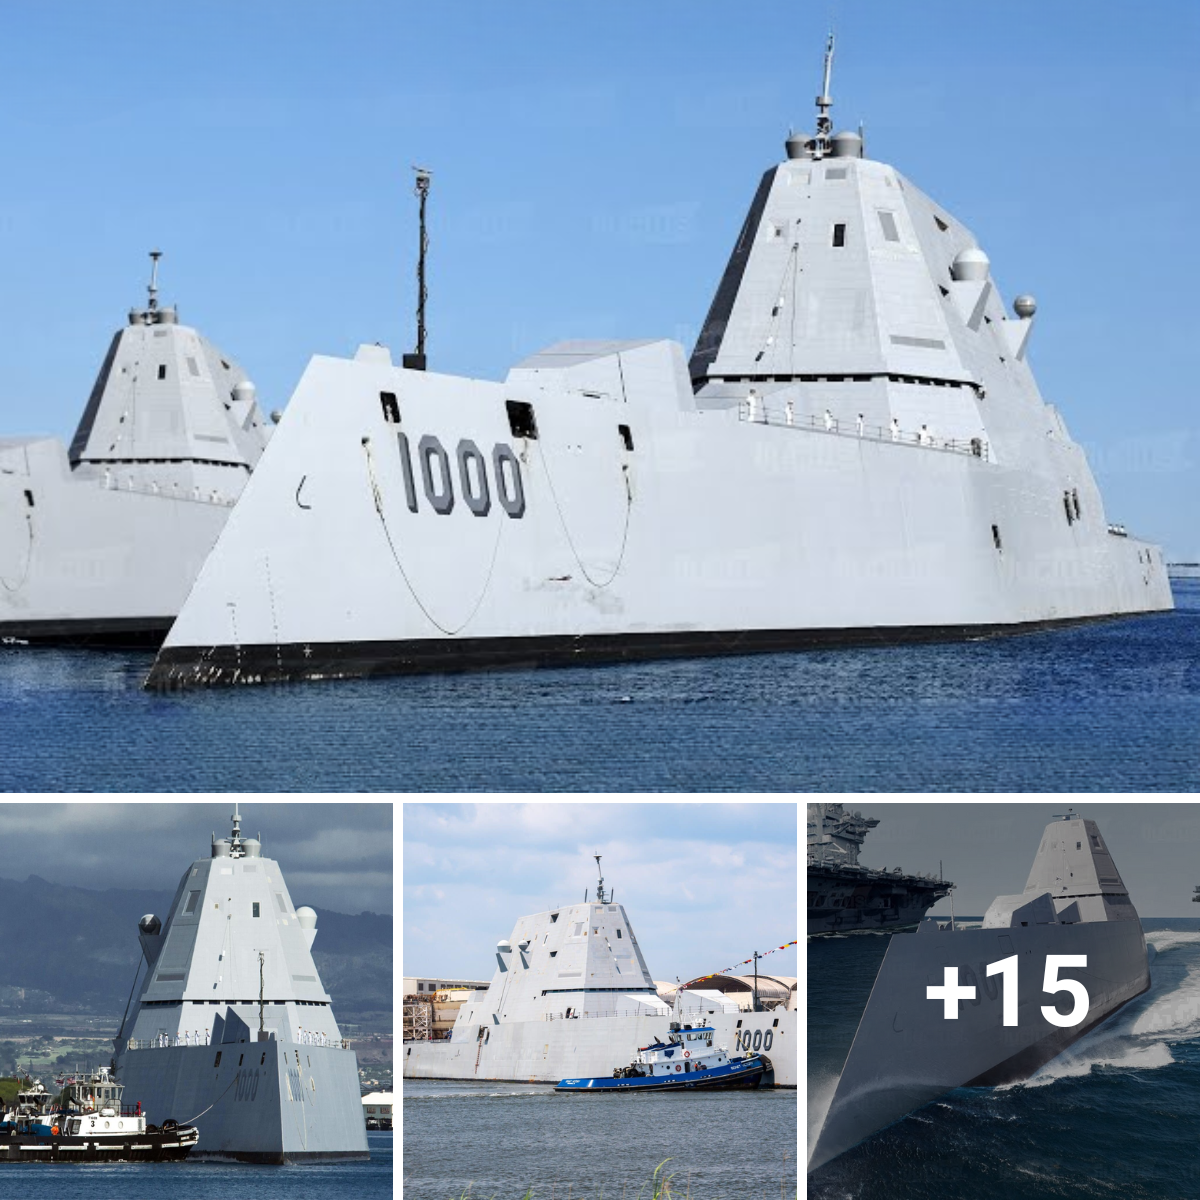 Sea guardians at great speed, the $4 billion stealth ships of the US Navy